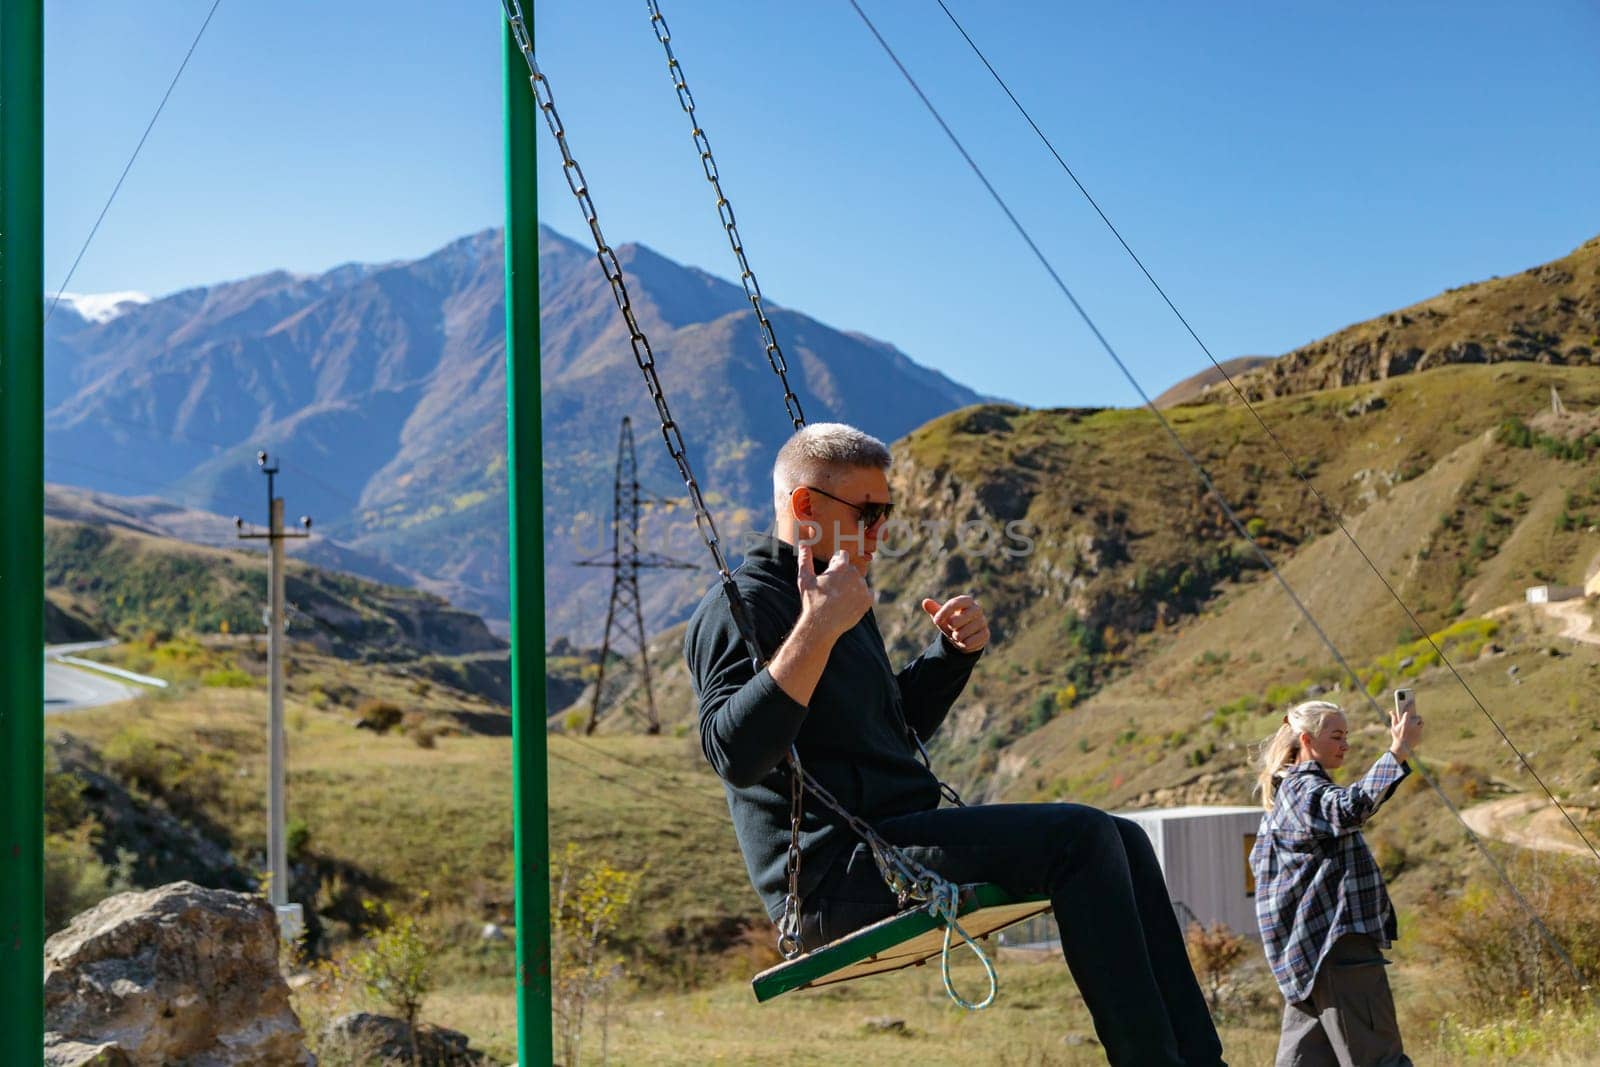 Man enjoying swinging on swing surrounded by mountains and beautiful natural landscape